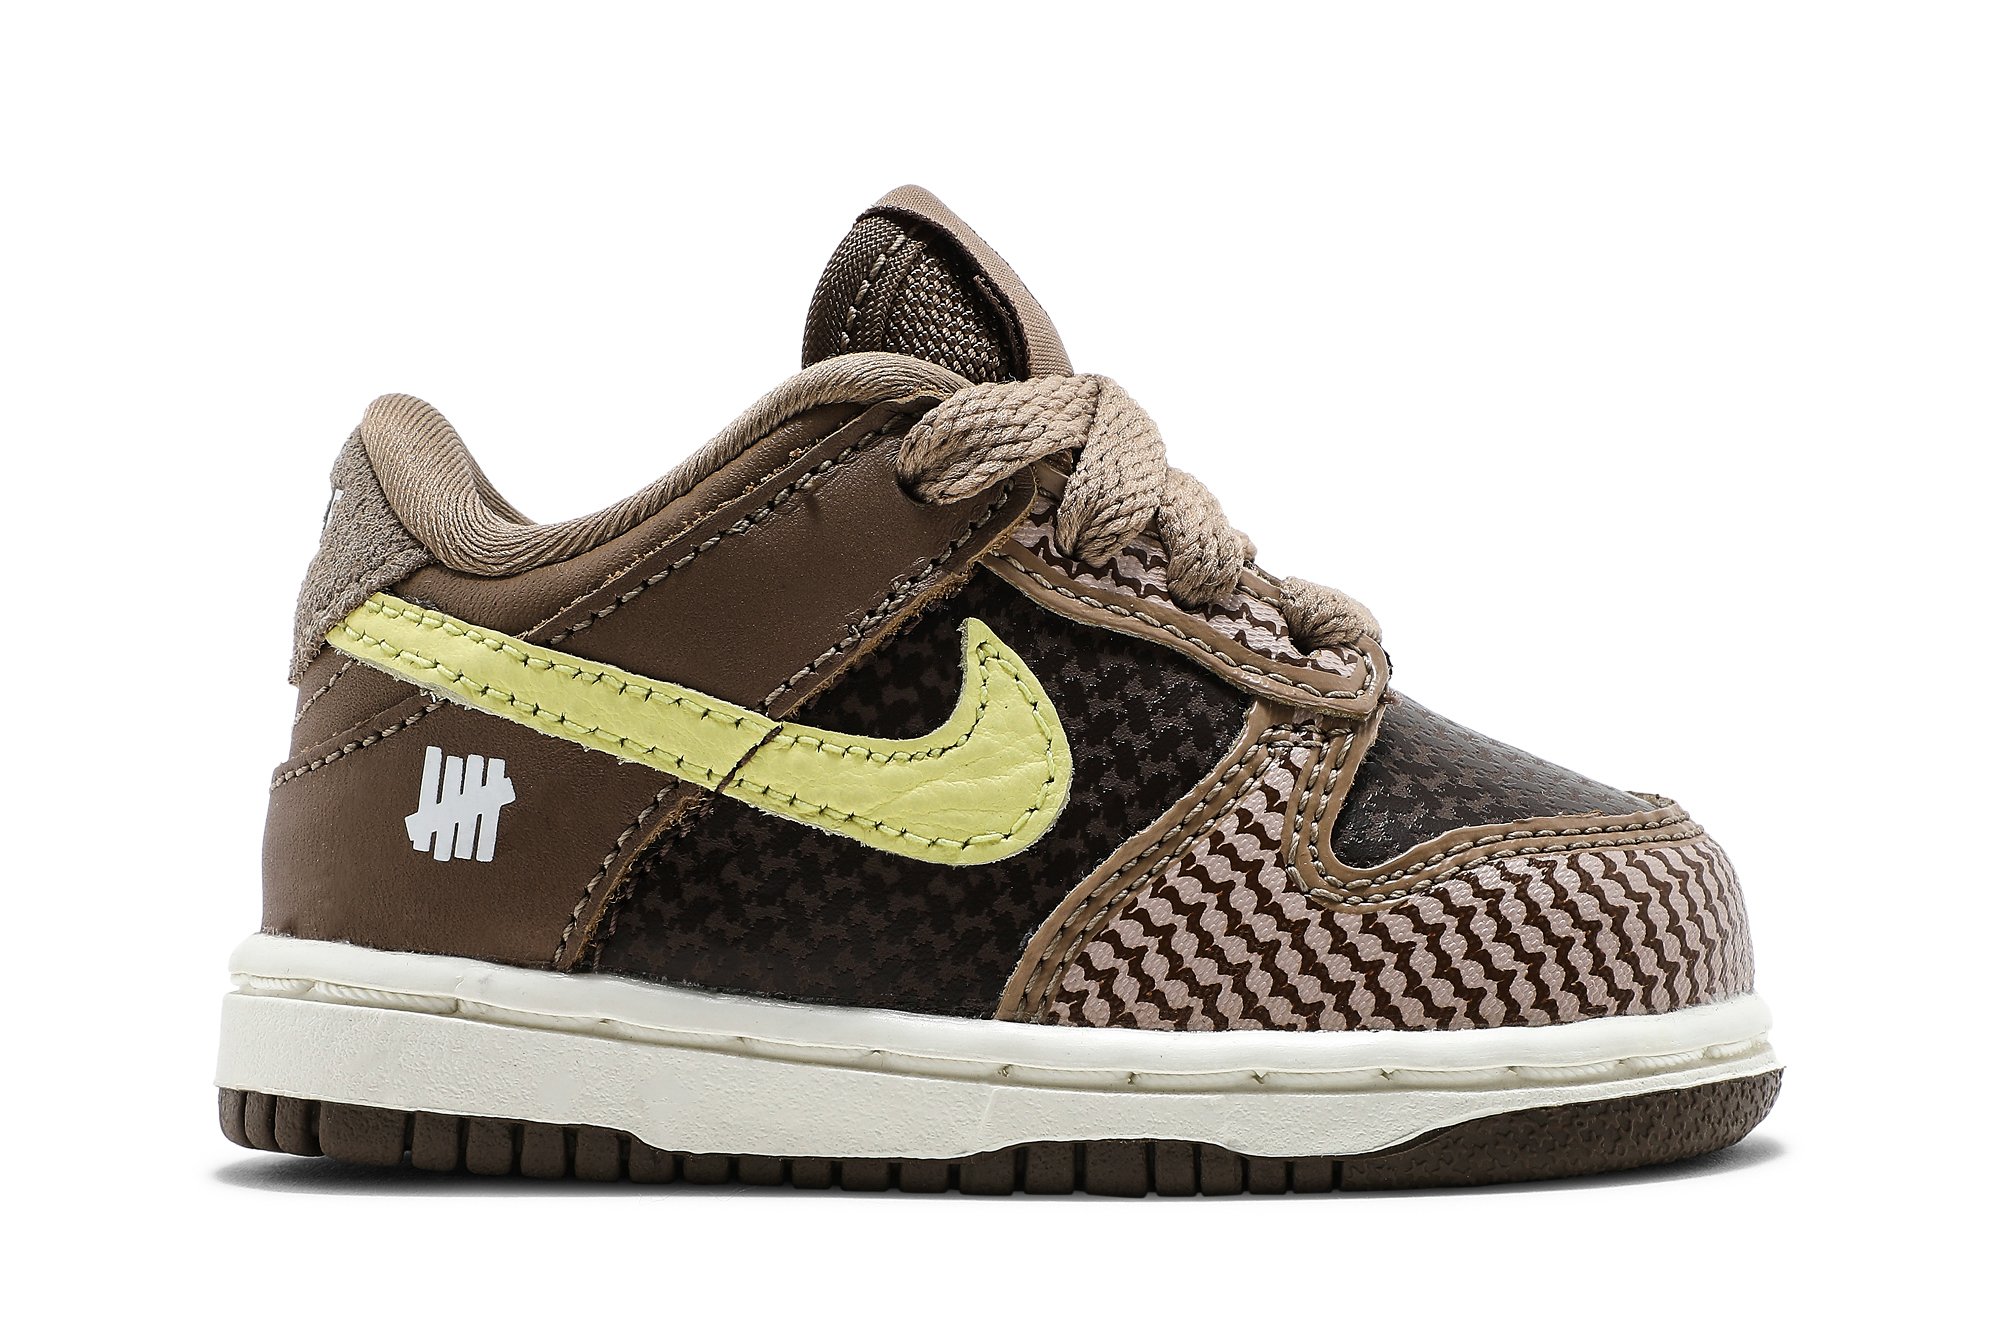 Buy Undefeated x Dunk Low SP TD 'Canteen' - DJ4307 200 | GOAT CA